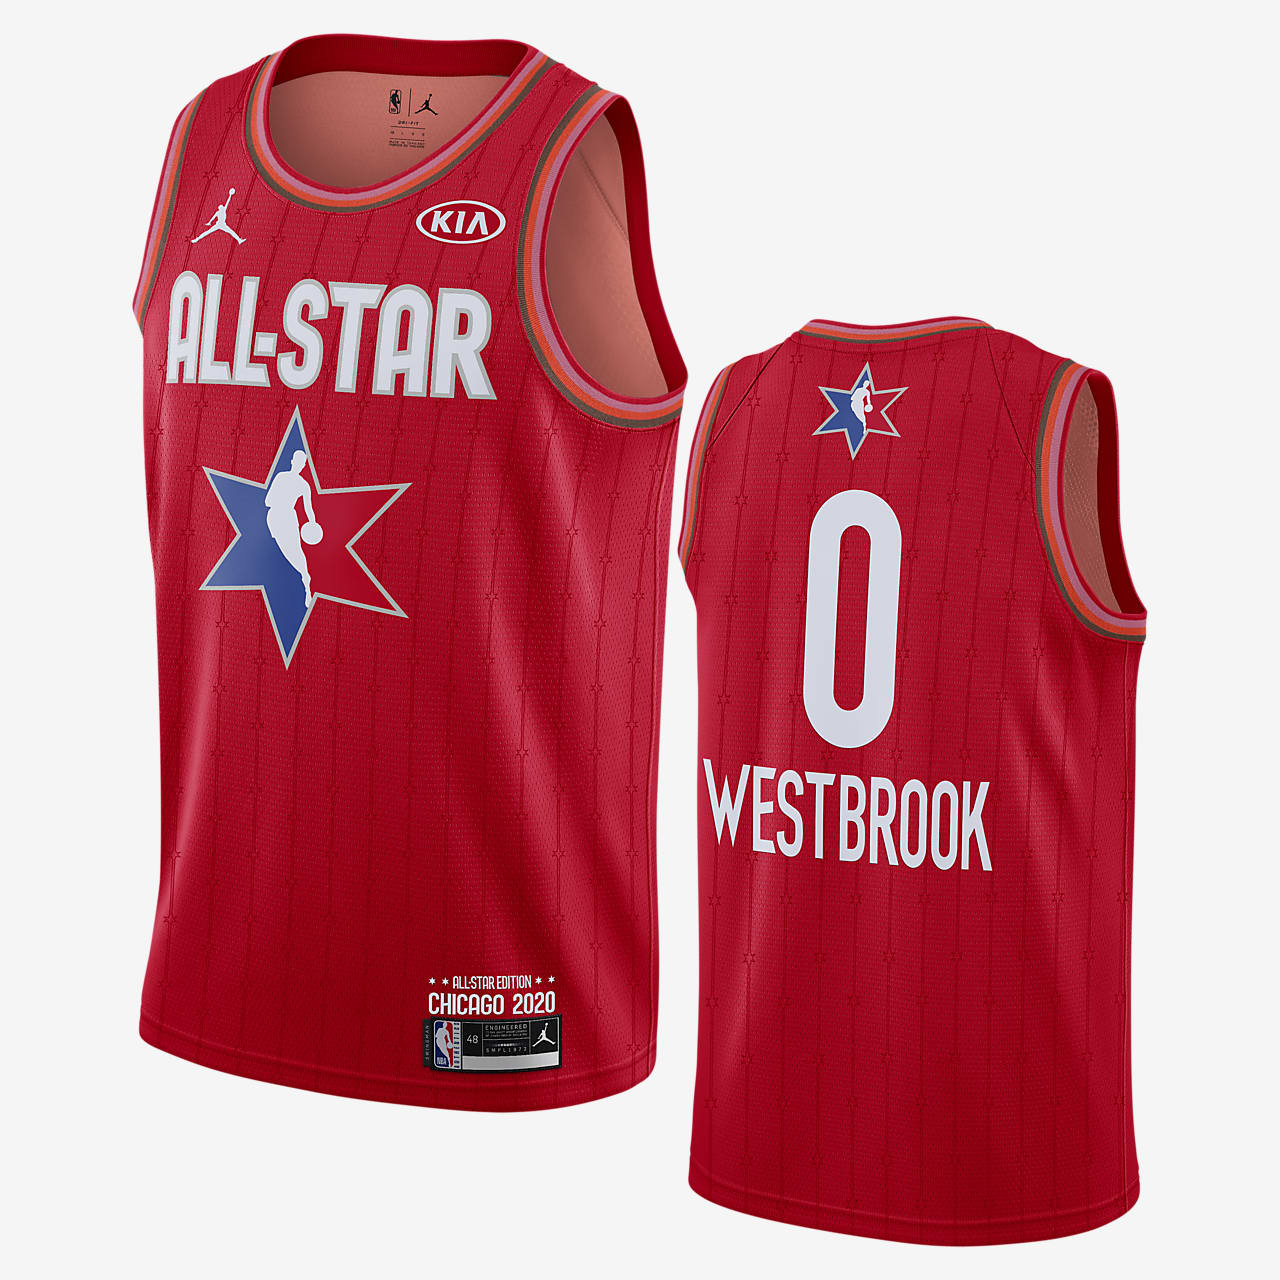 russell westbrook jersey number